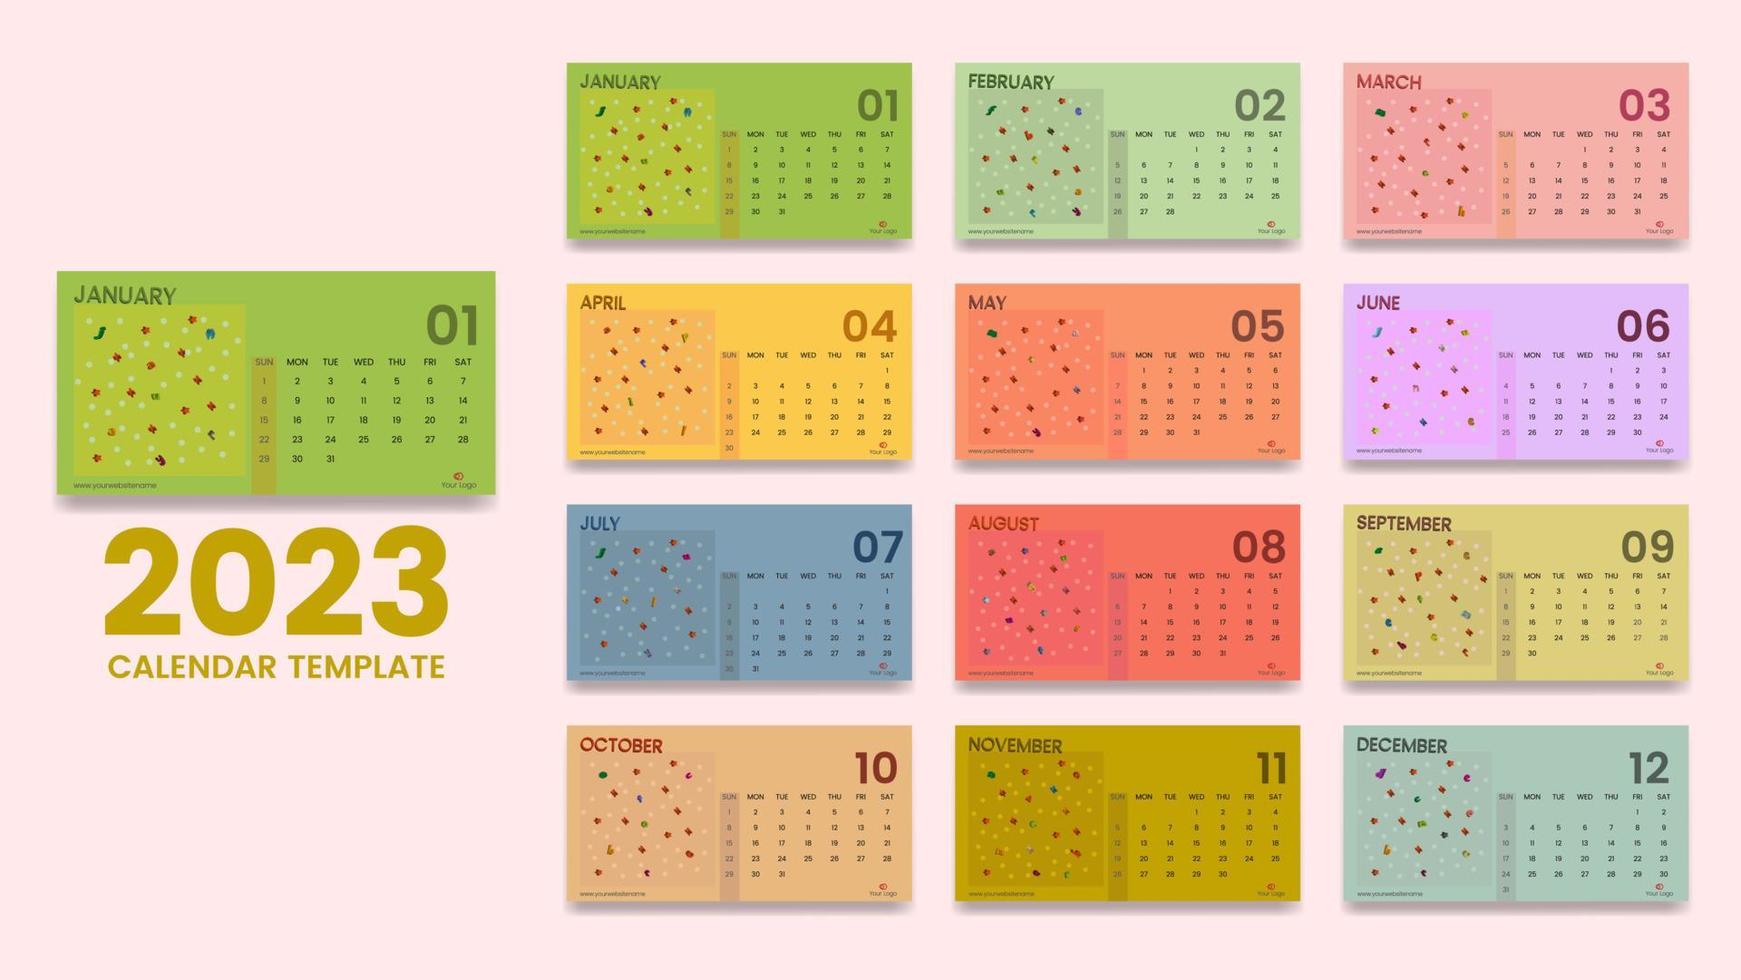 Desk Calendar 2023 Or Monthly Weekly Schedule New Year Colorful Calendar Design Template vector